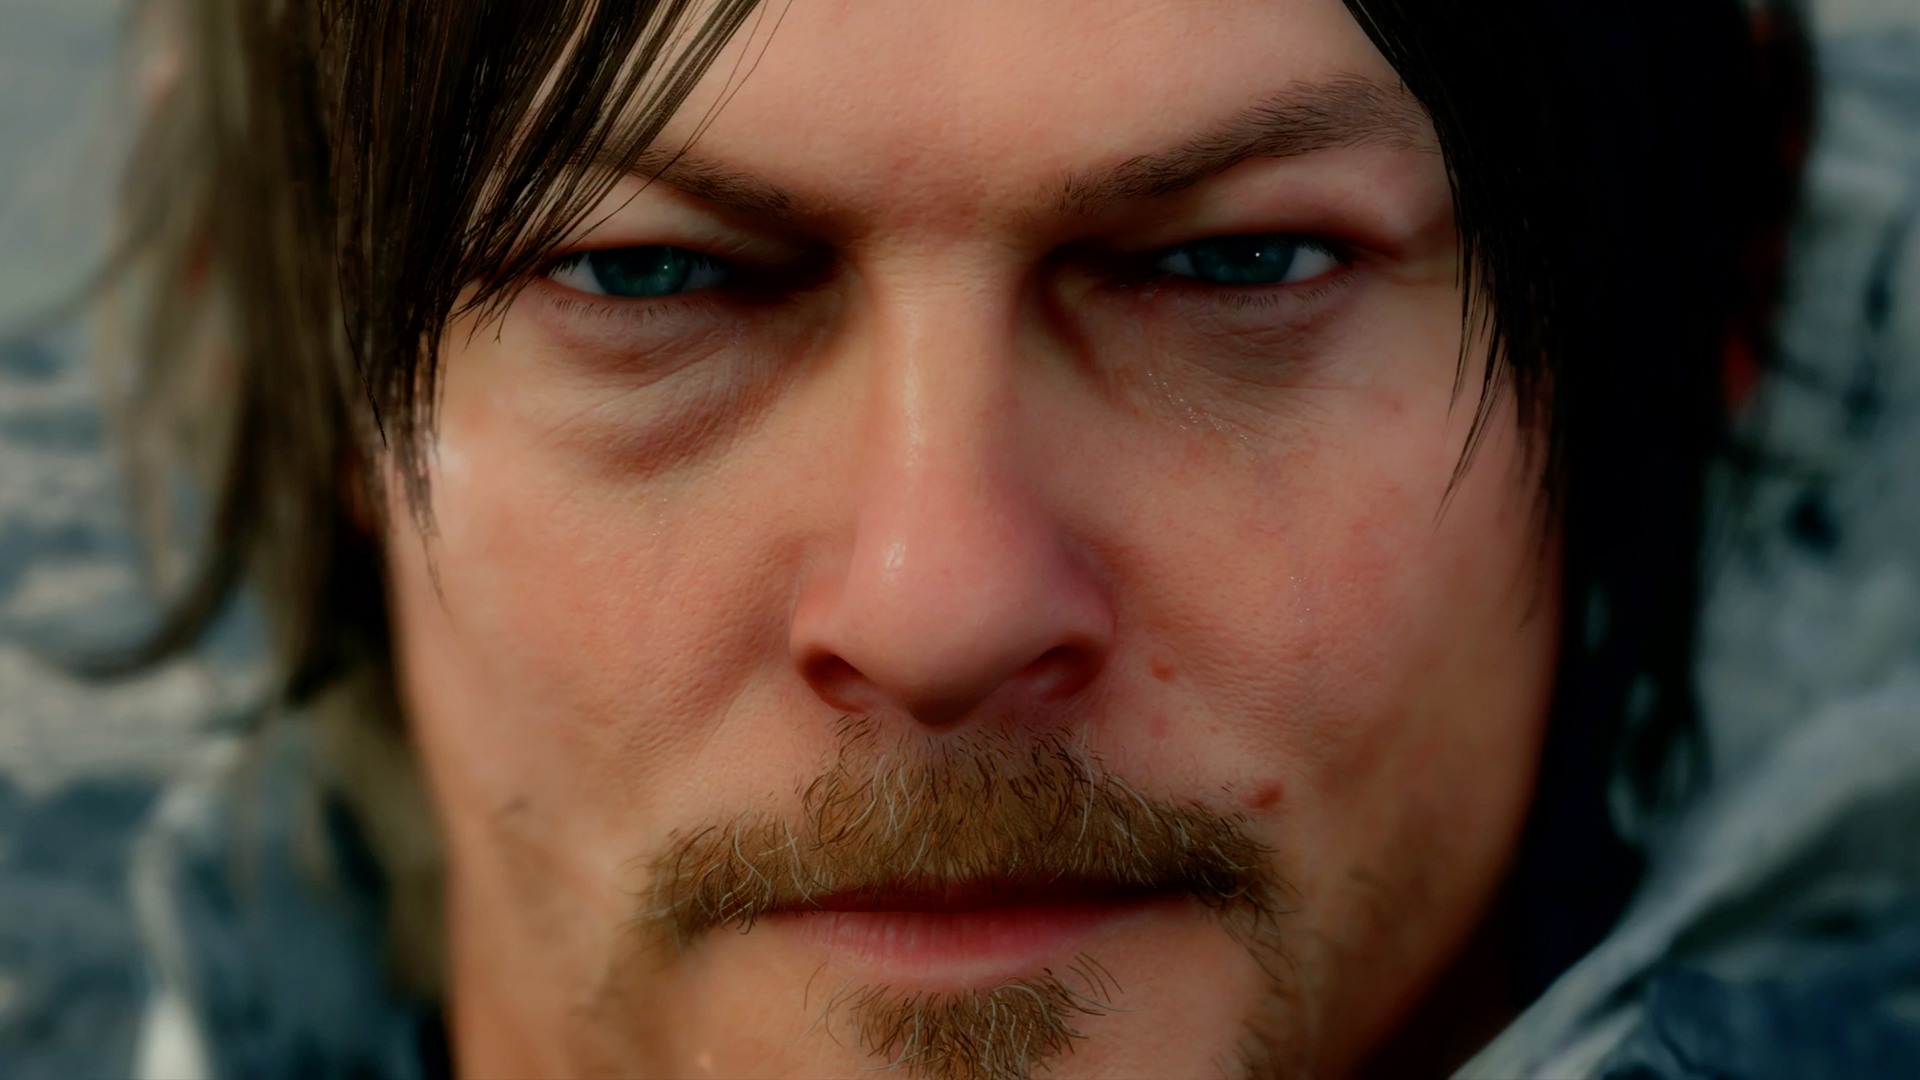 Reedus: I Completely Forgot About P.T. When I Heard of Death